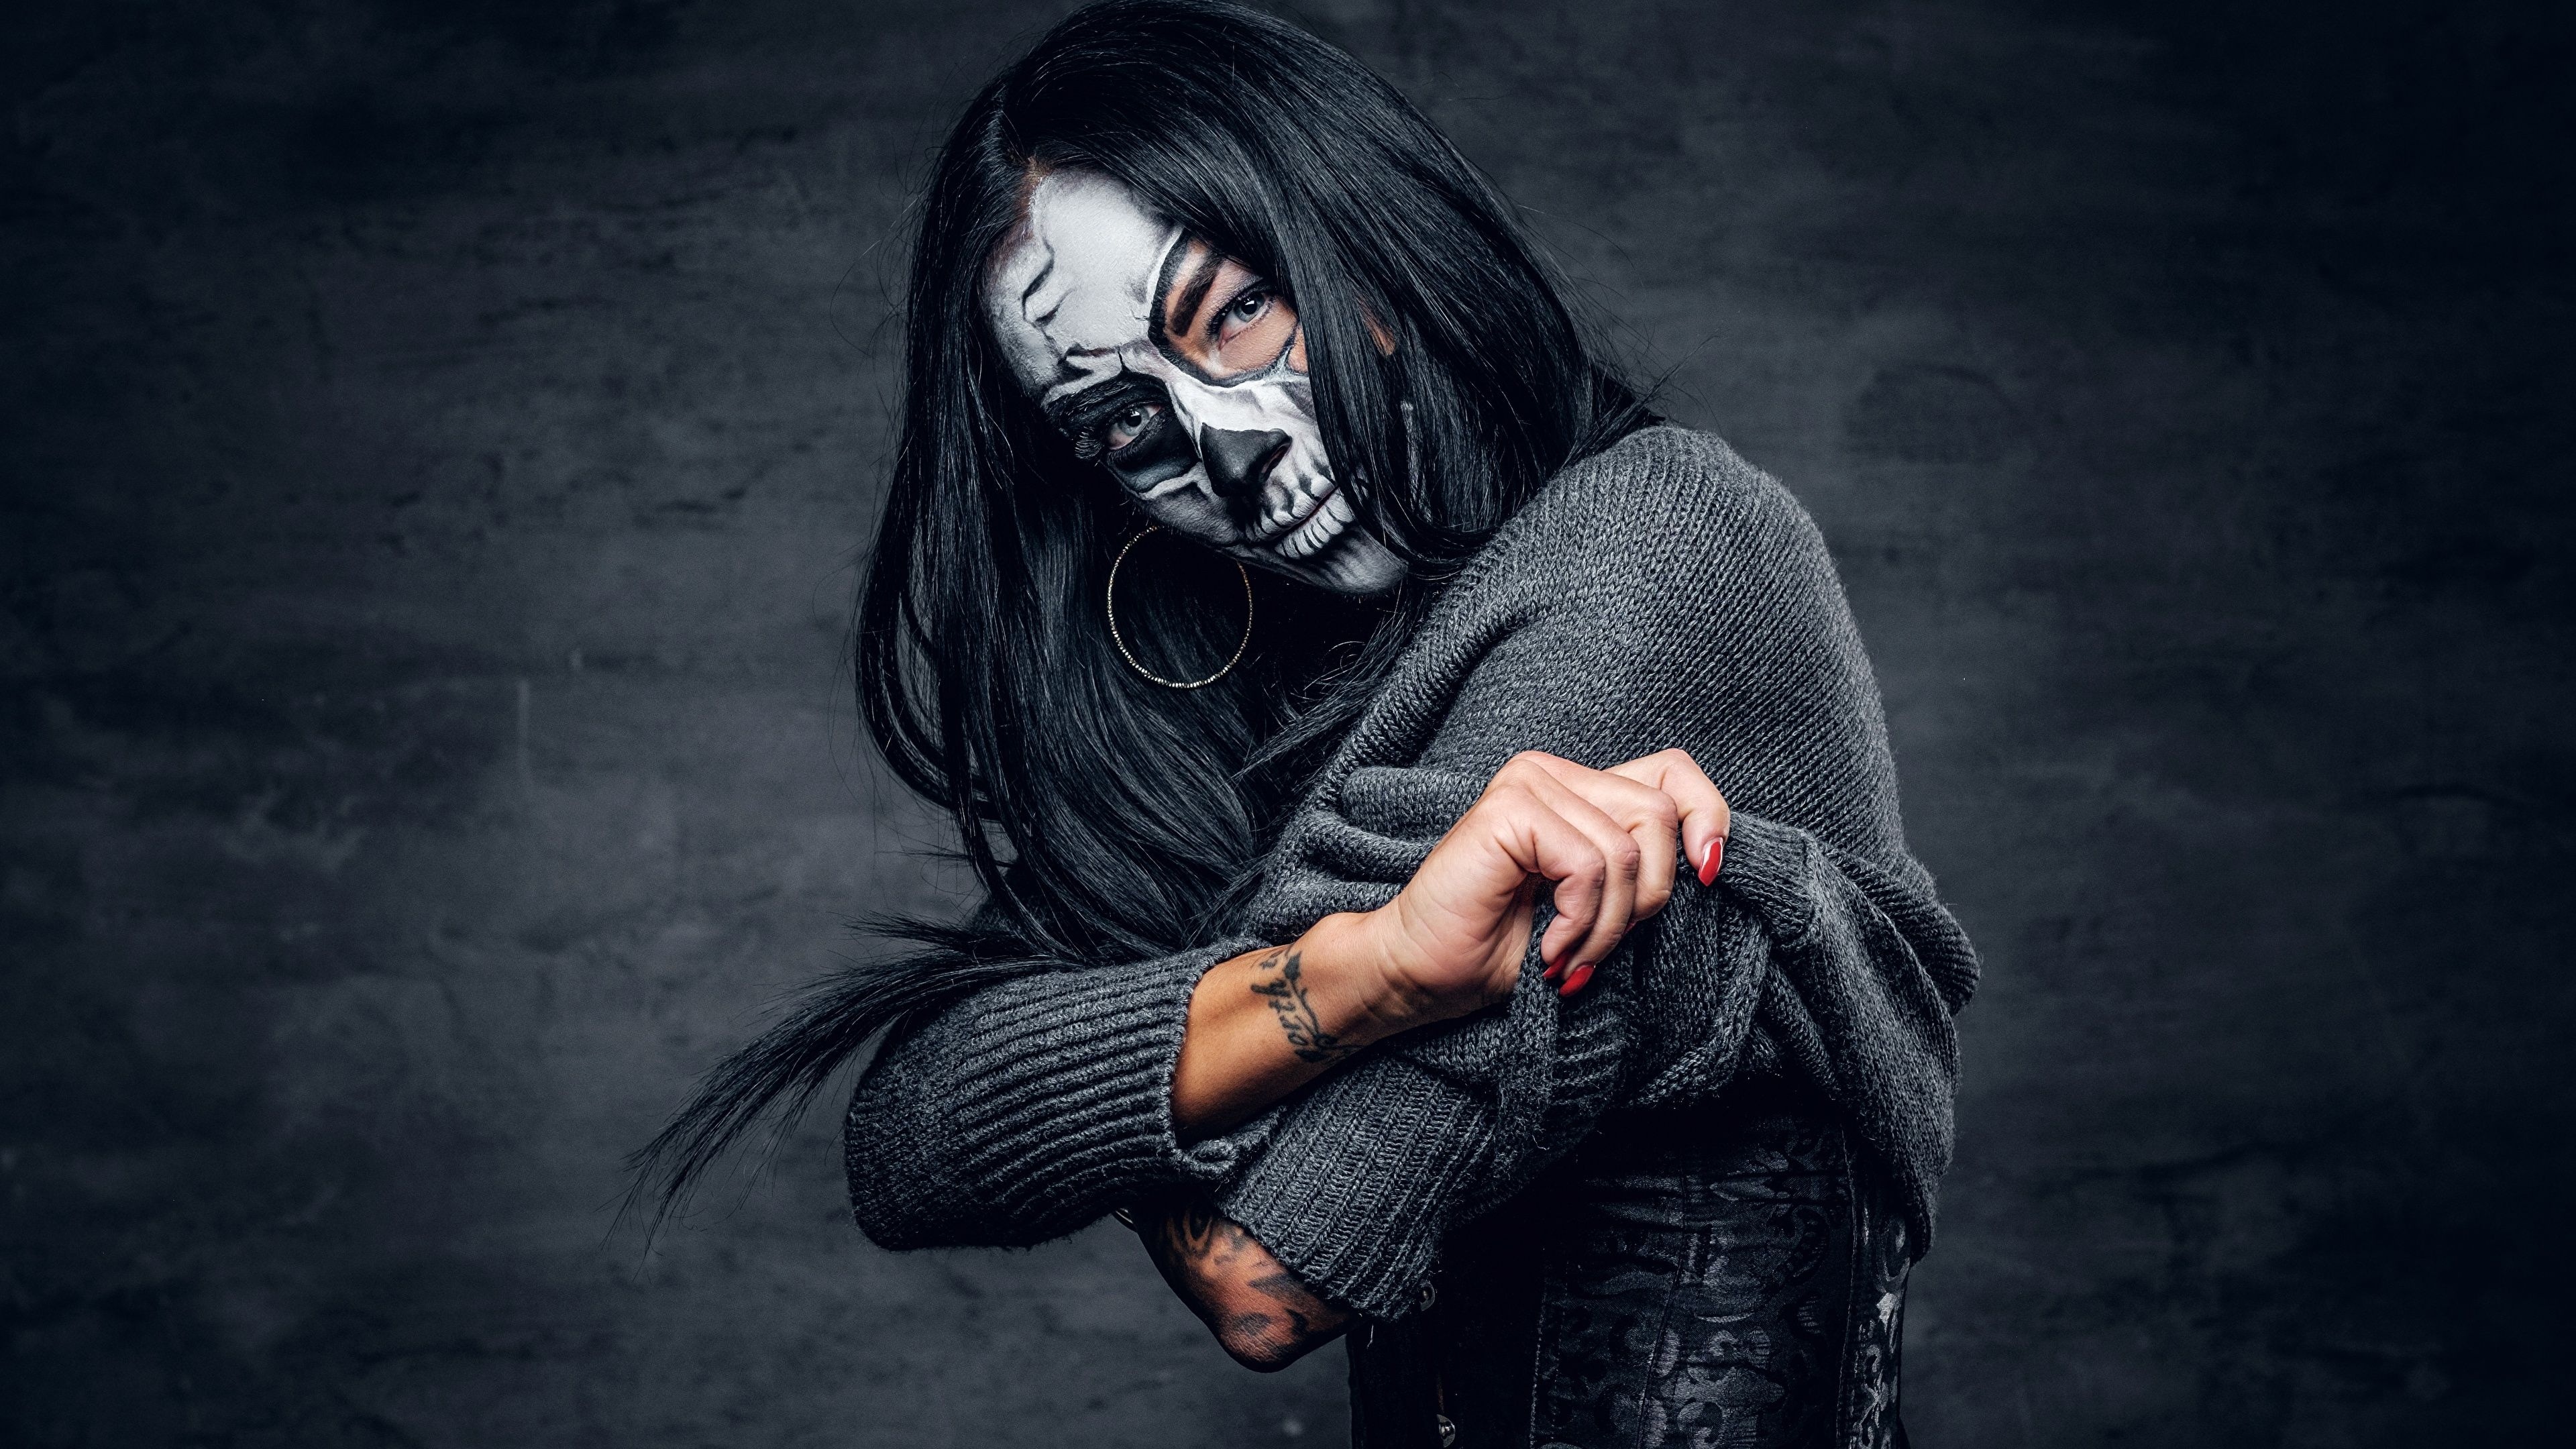 Goth Girl: Gothic fashion and styling, Skeleton makeup, Face art, Body art. 3840x2160 4K Background.